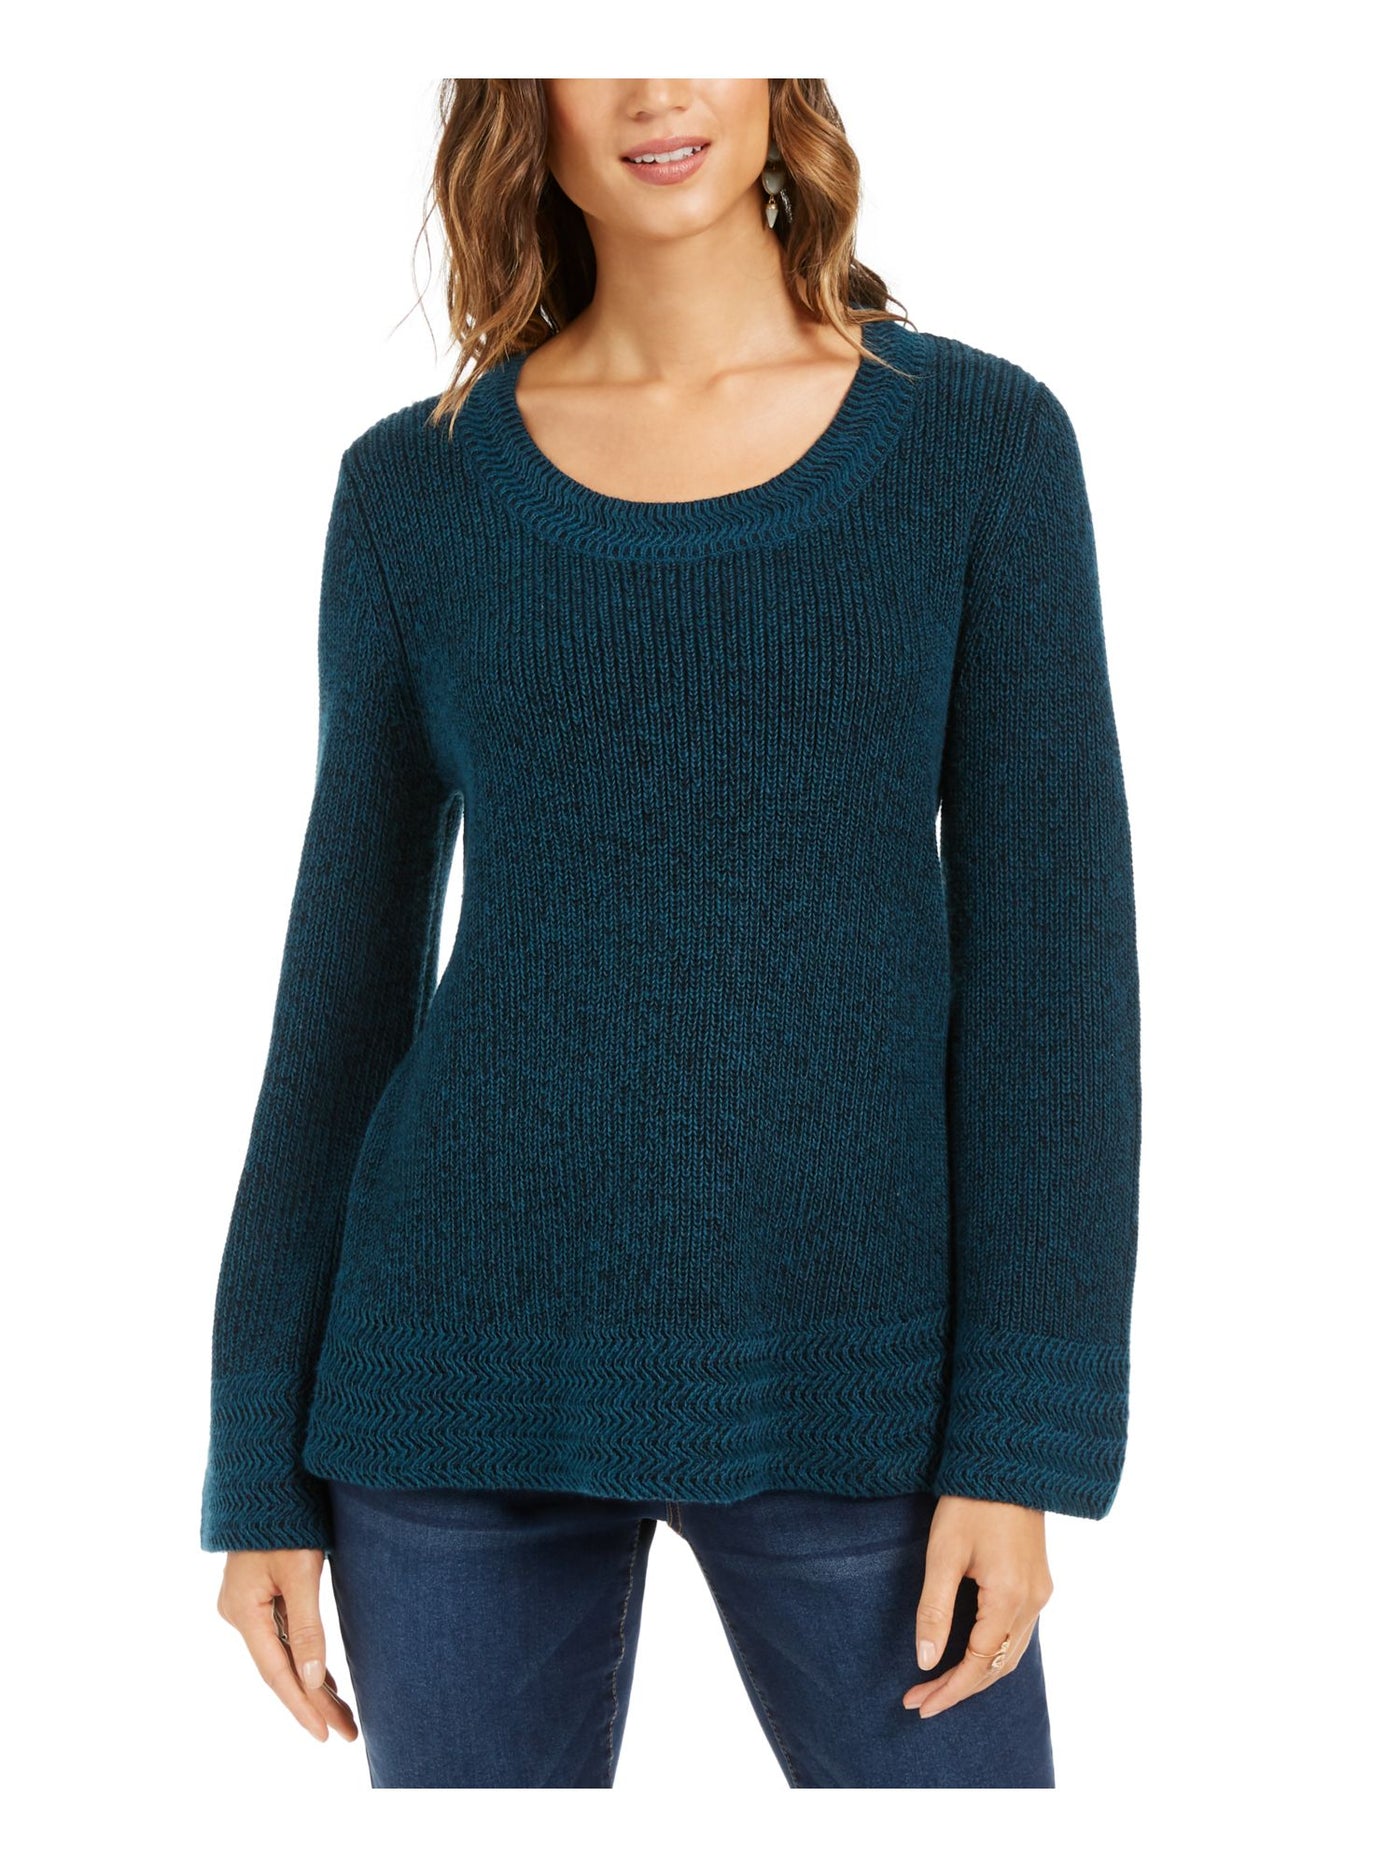 STYLE & COMPANY Womens Teal Textured  Knitted Printed Long Sleeve Scoop Neck T-Shirt Petites PS